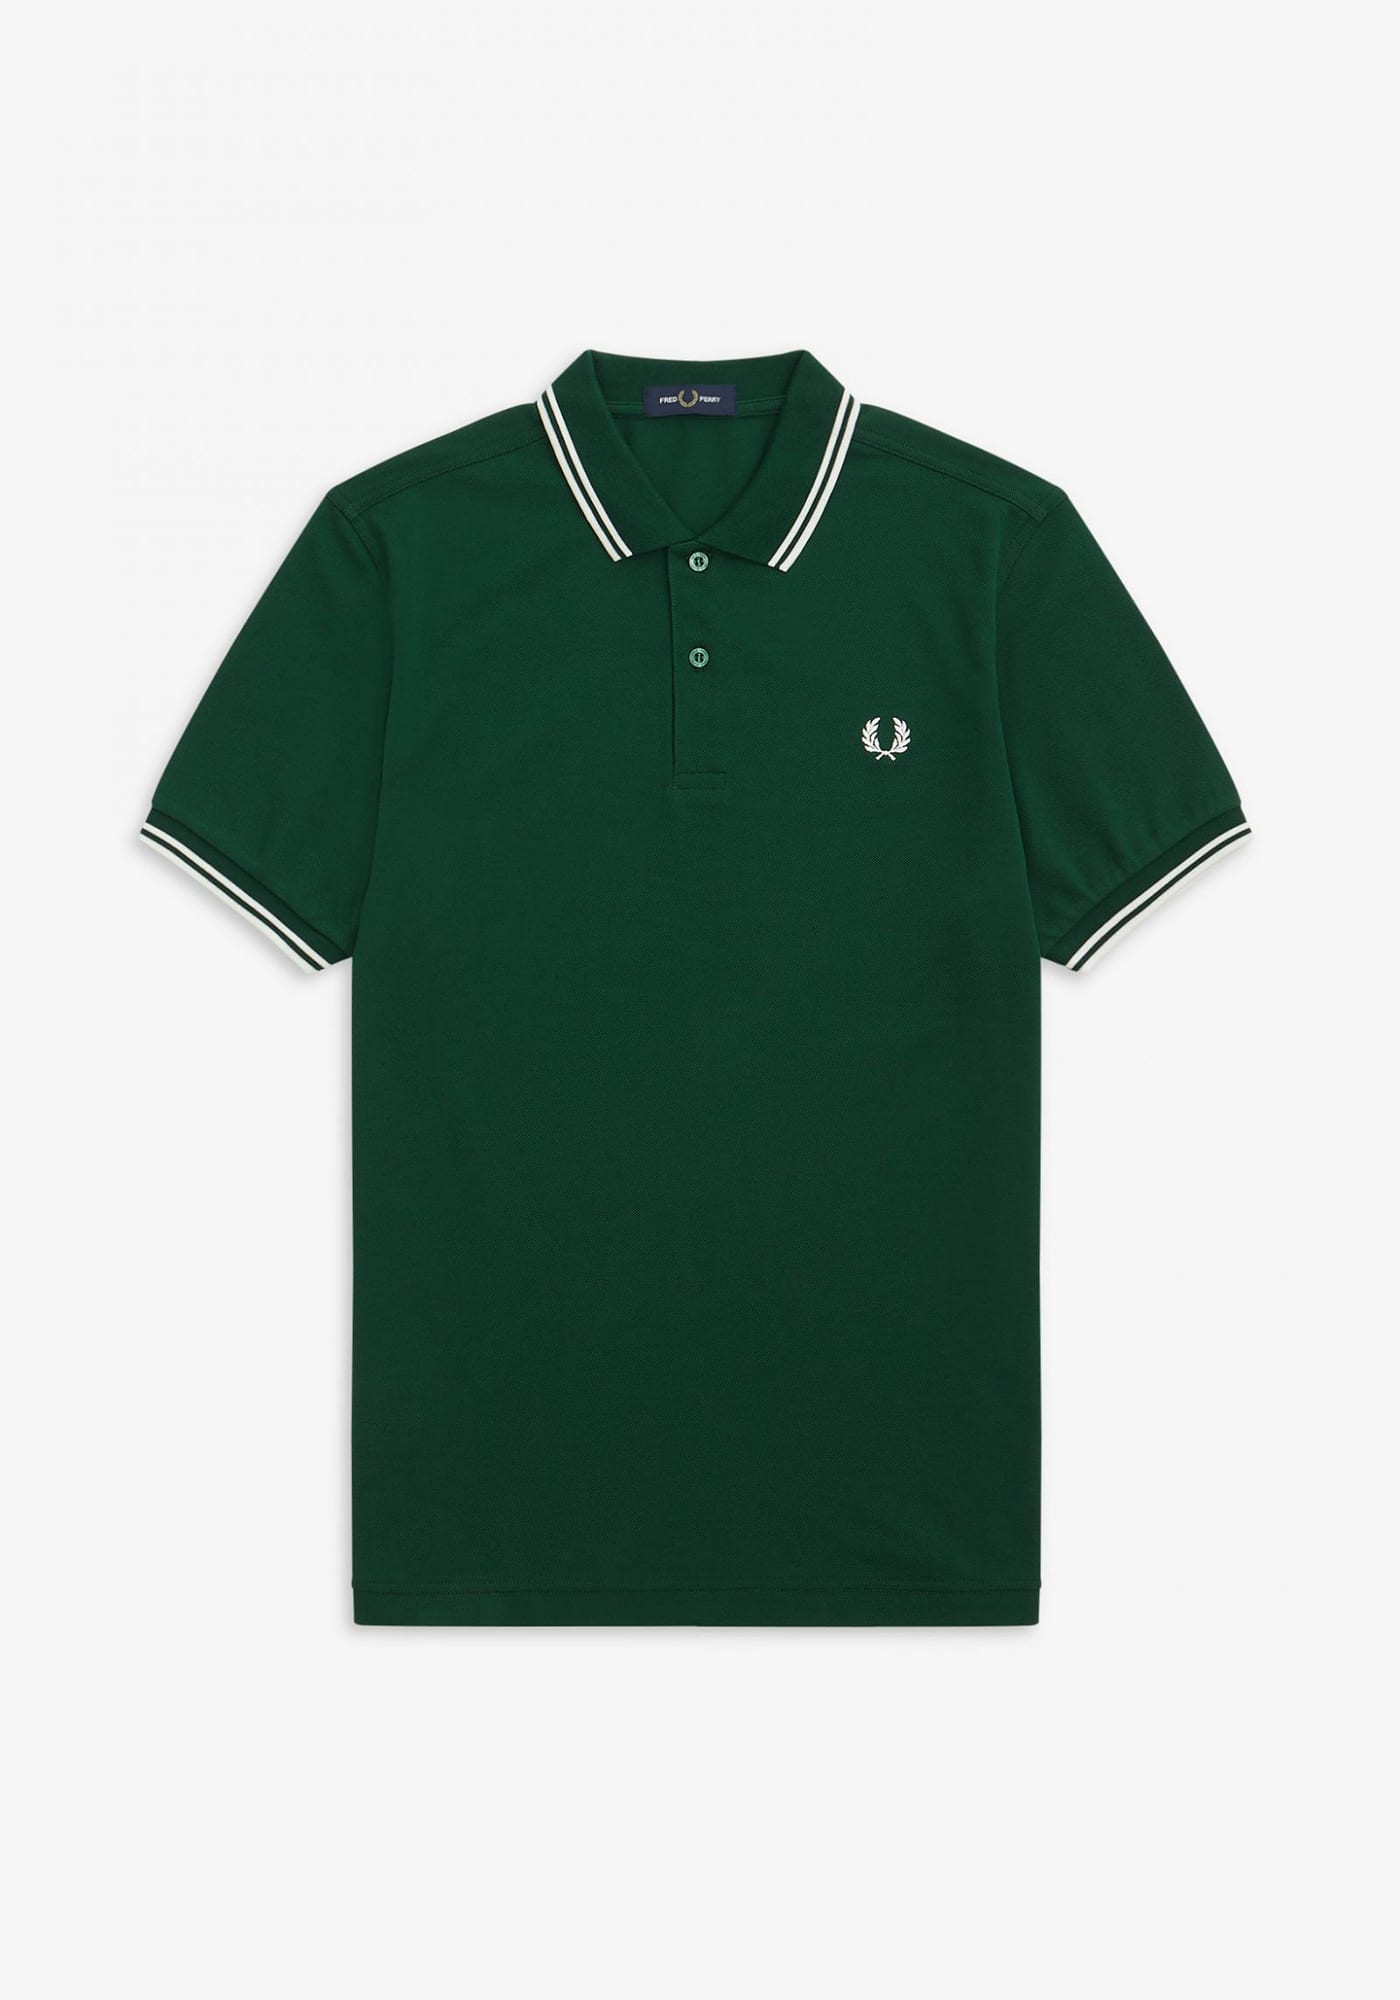 The Fred Perry Shirt - M3600(XS 238: NAVY / WHITE)｜ FRED PERRY｜渋谷PARCO ...